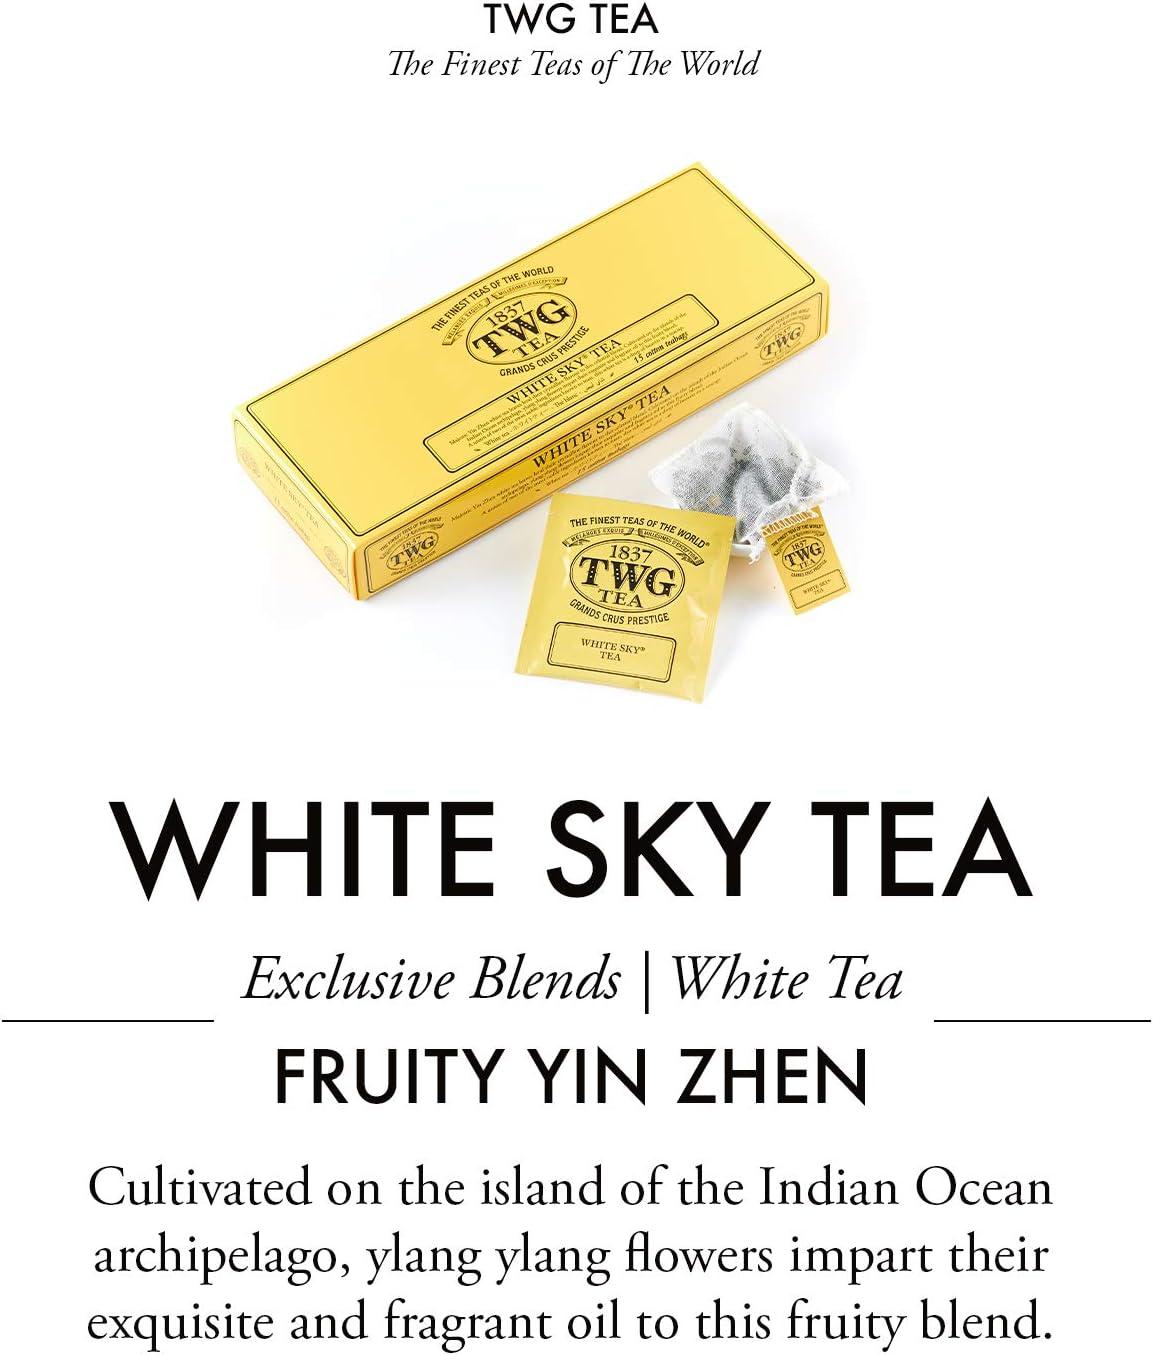 TWG TEA UNWRAPS THE ULTIMATE GIFT GUIDE FOR TEA-LOVERS - Hotel News ME